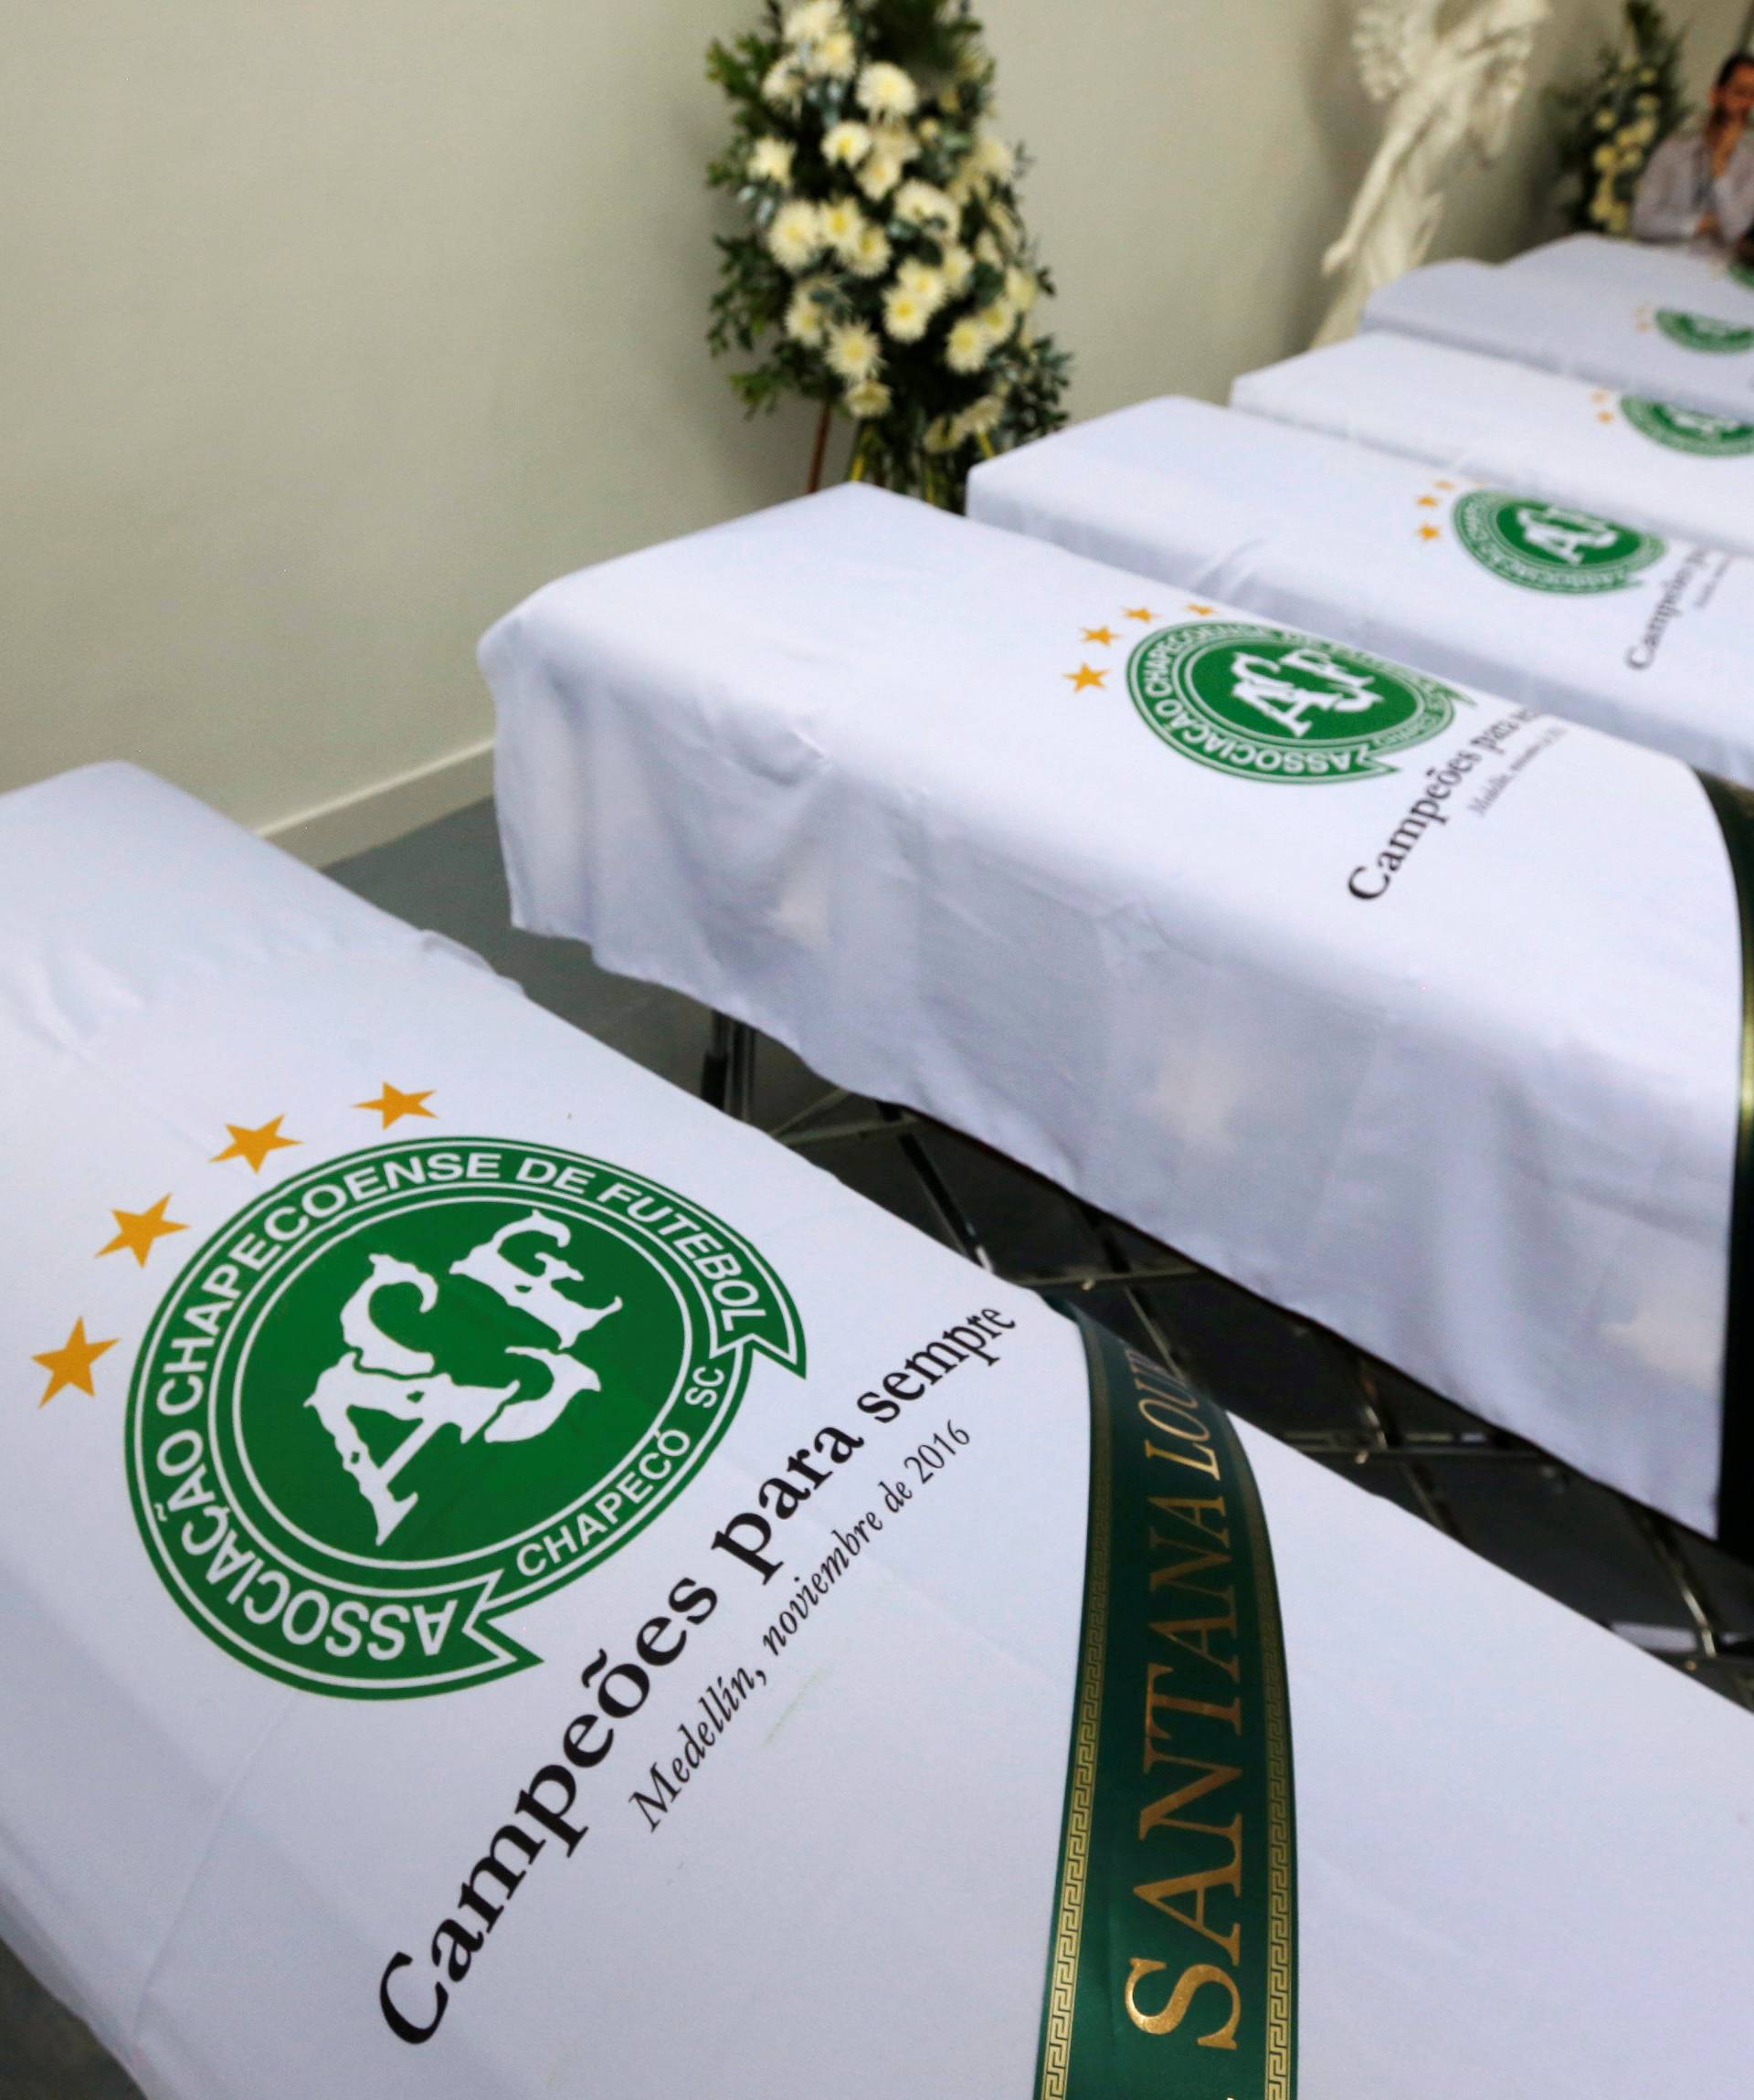 Blankets bearing the crest of Brazilian soccer team Chapecoense are placed on coffins holding the remains of the victims who died in an accident of the plane that crashed into the Colombian jungle with the team's players onboard, in Medellin